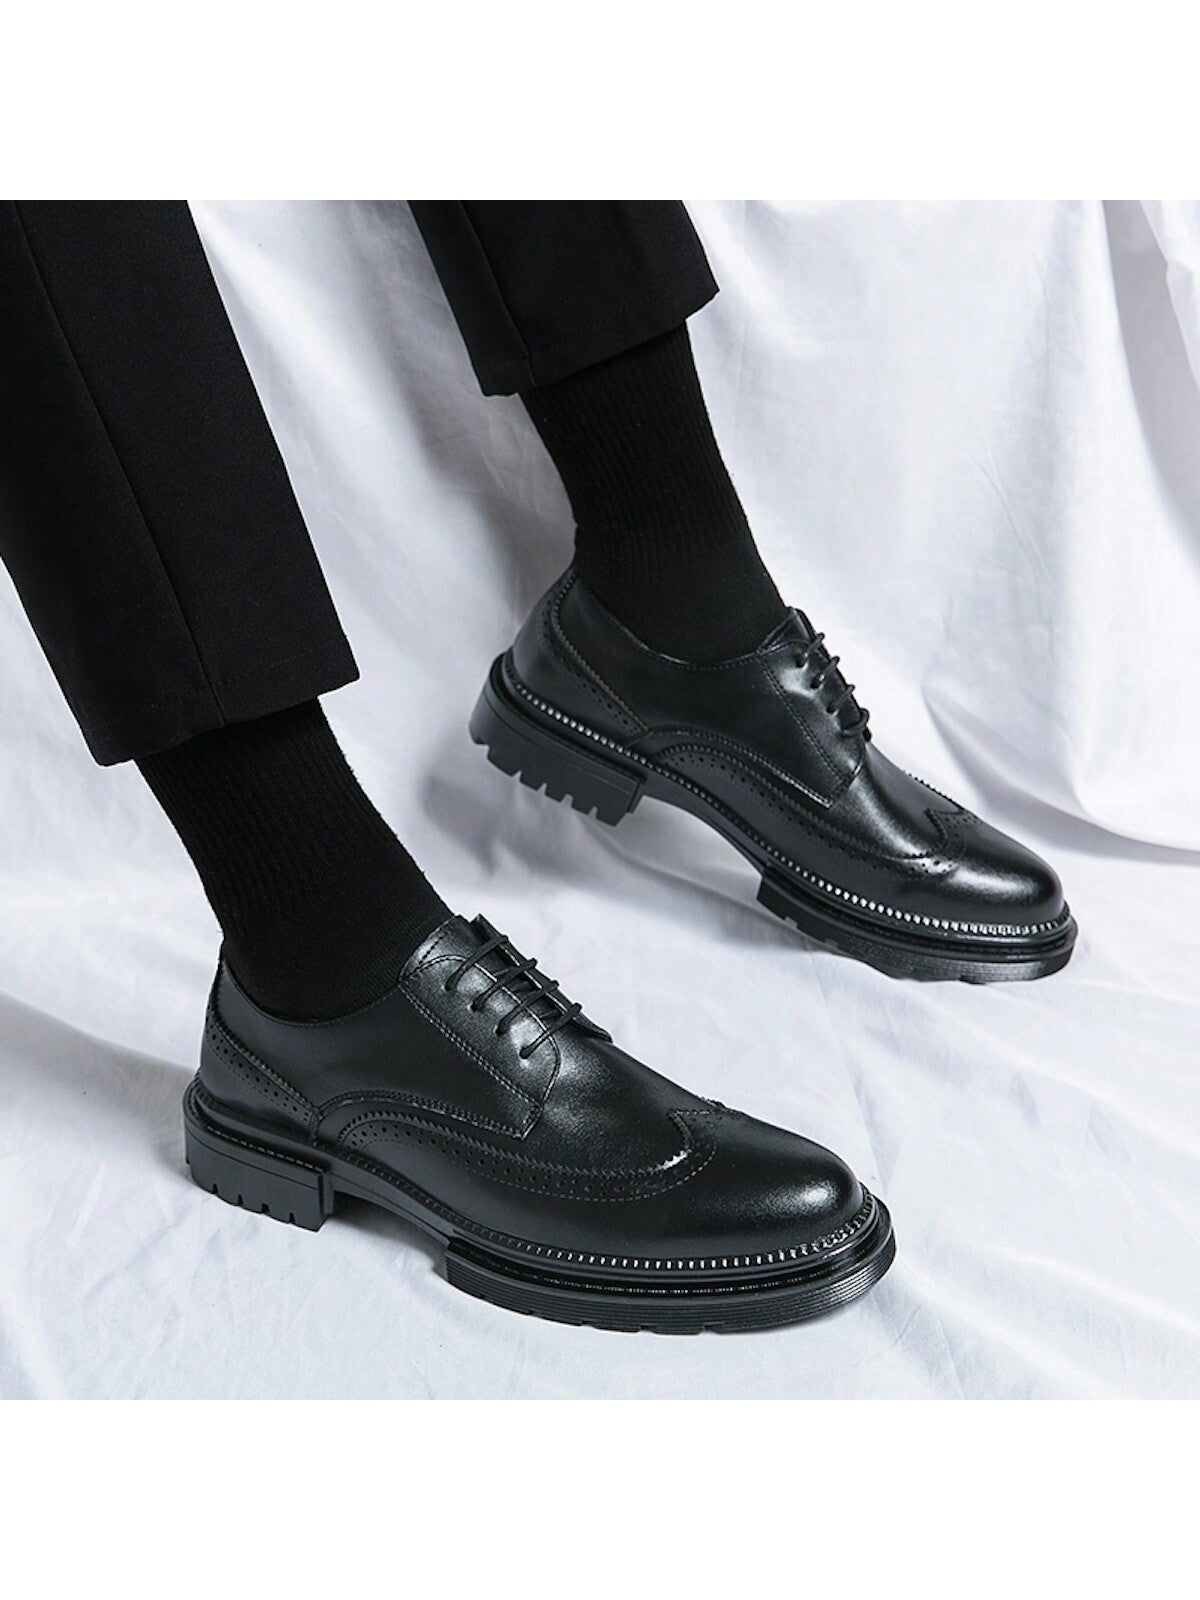 Men's Thick-Soled Height-Increasing Fashion Shoes Classic Lace-Up Leather Oxford Shoes With British Style Brogue Decoration For Streetwear & Casual Fashion